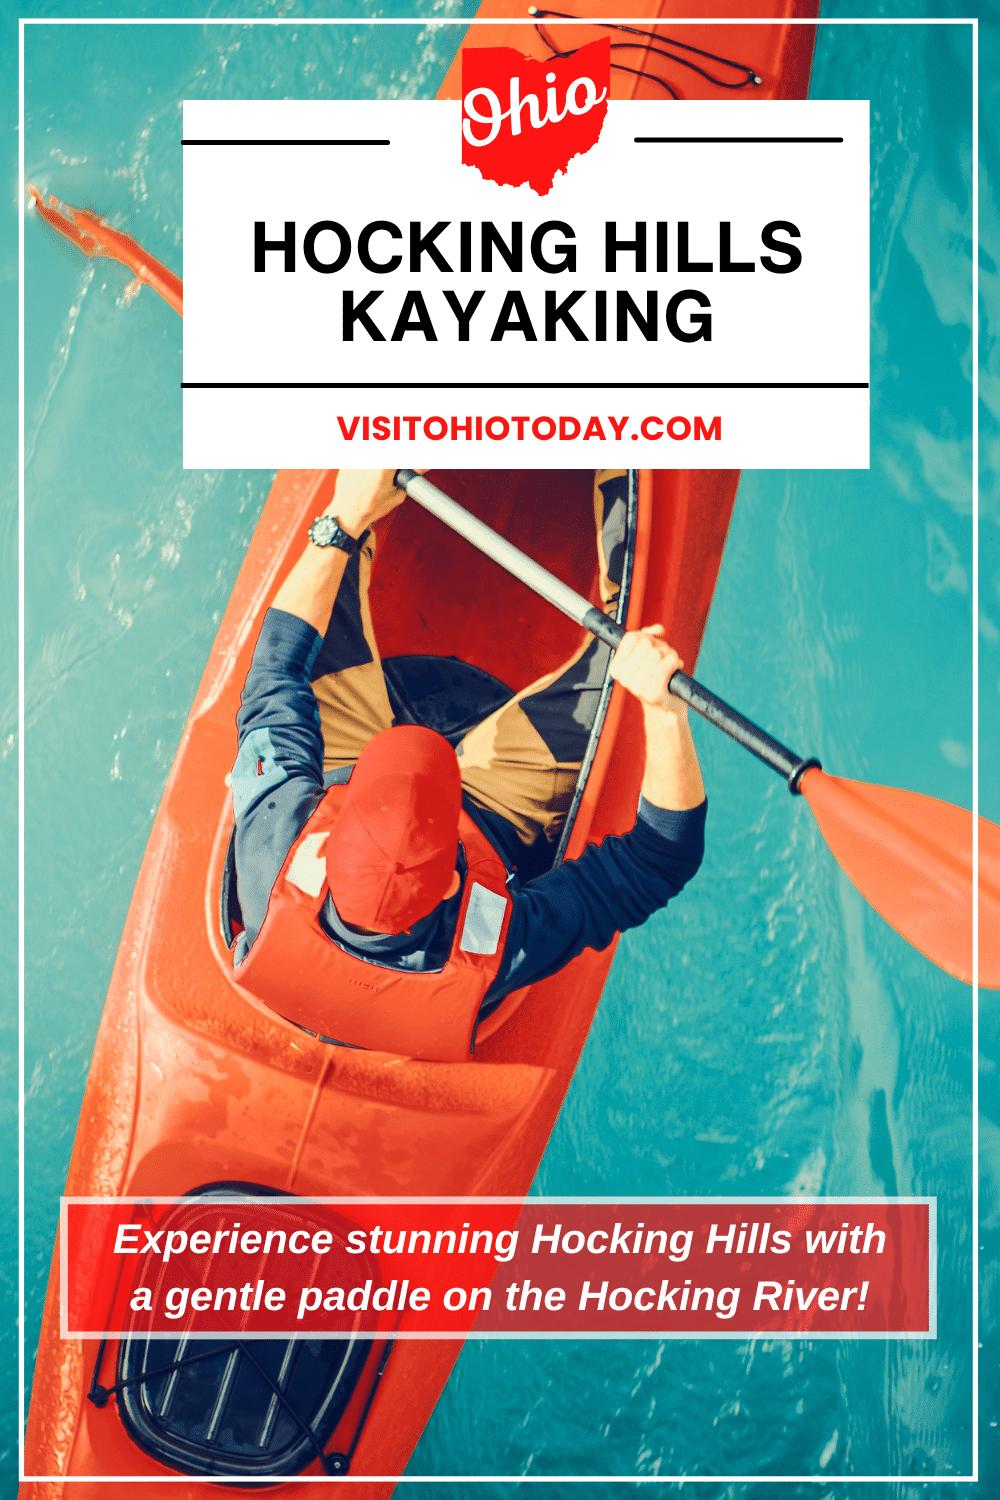 Hocking Hills kayaking is fantastic as there are different options for people who wish to kayak. Whether you are an experienced kayaker, or you want to have a go for the first time, there is something along the Hocking River for you!